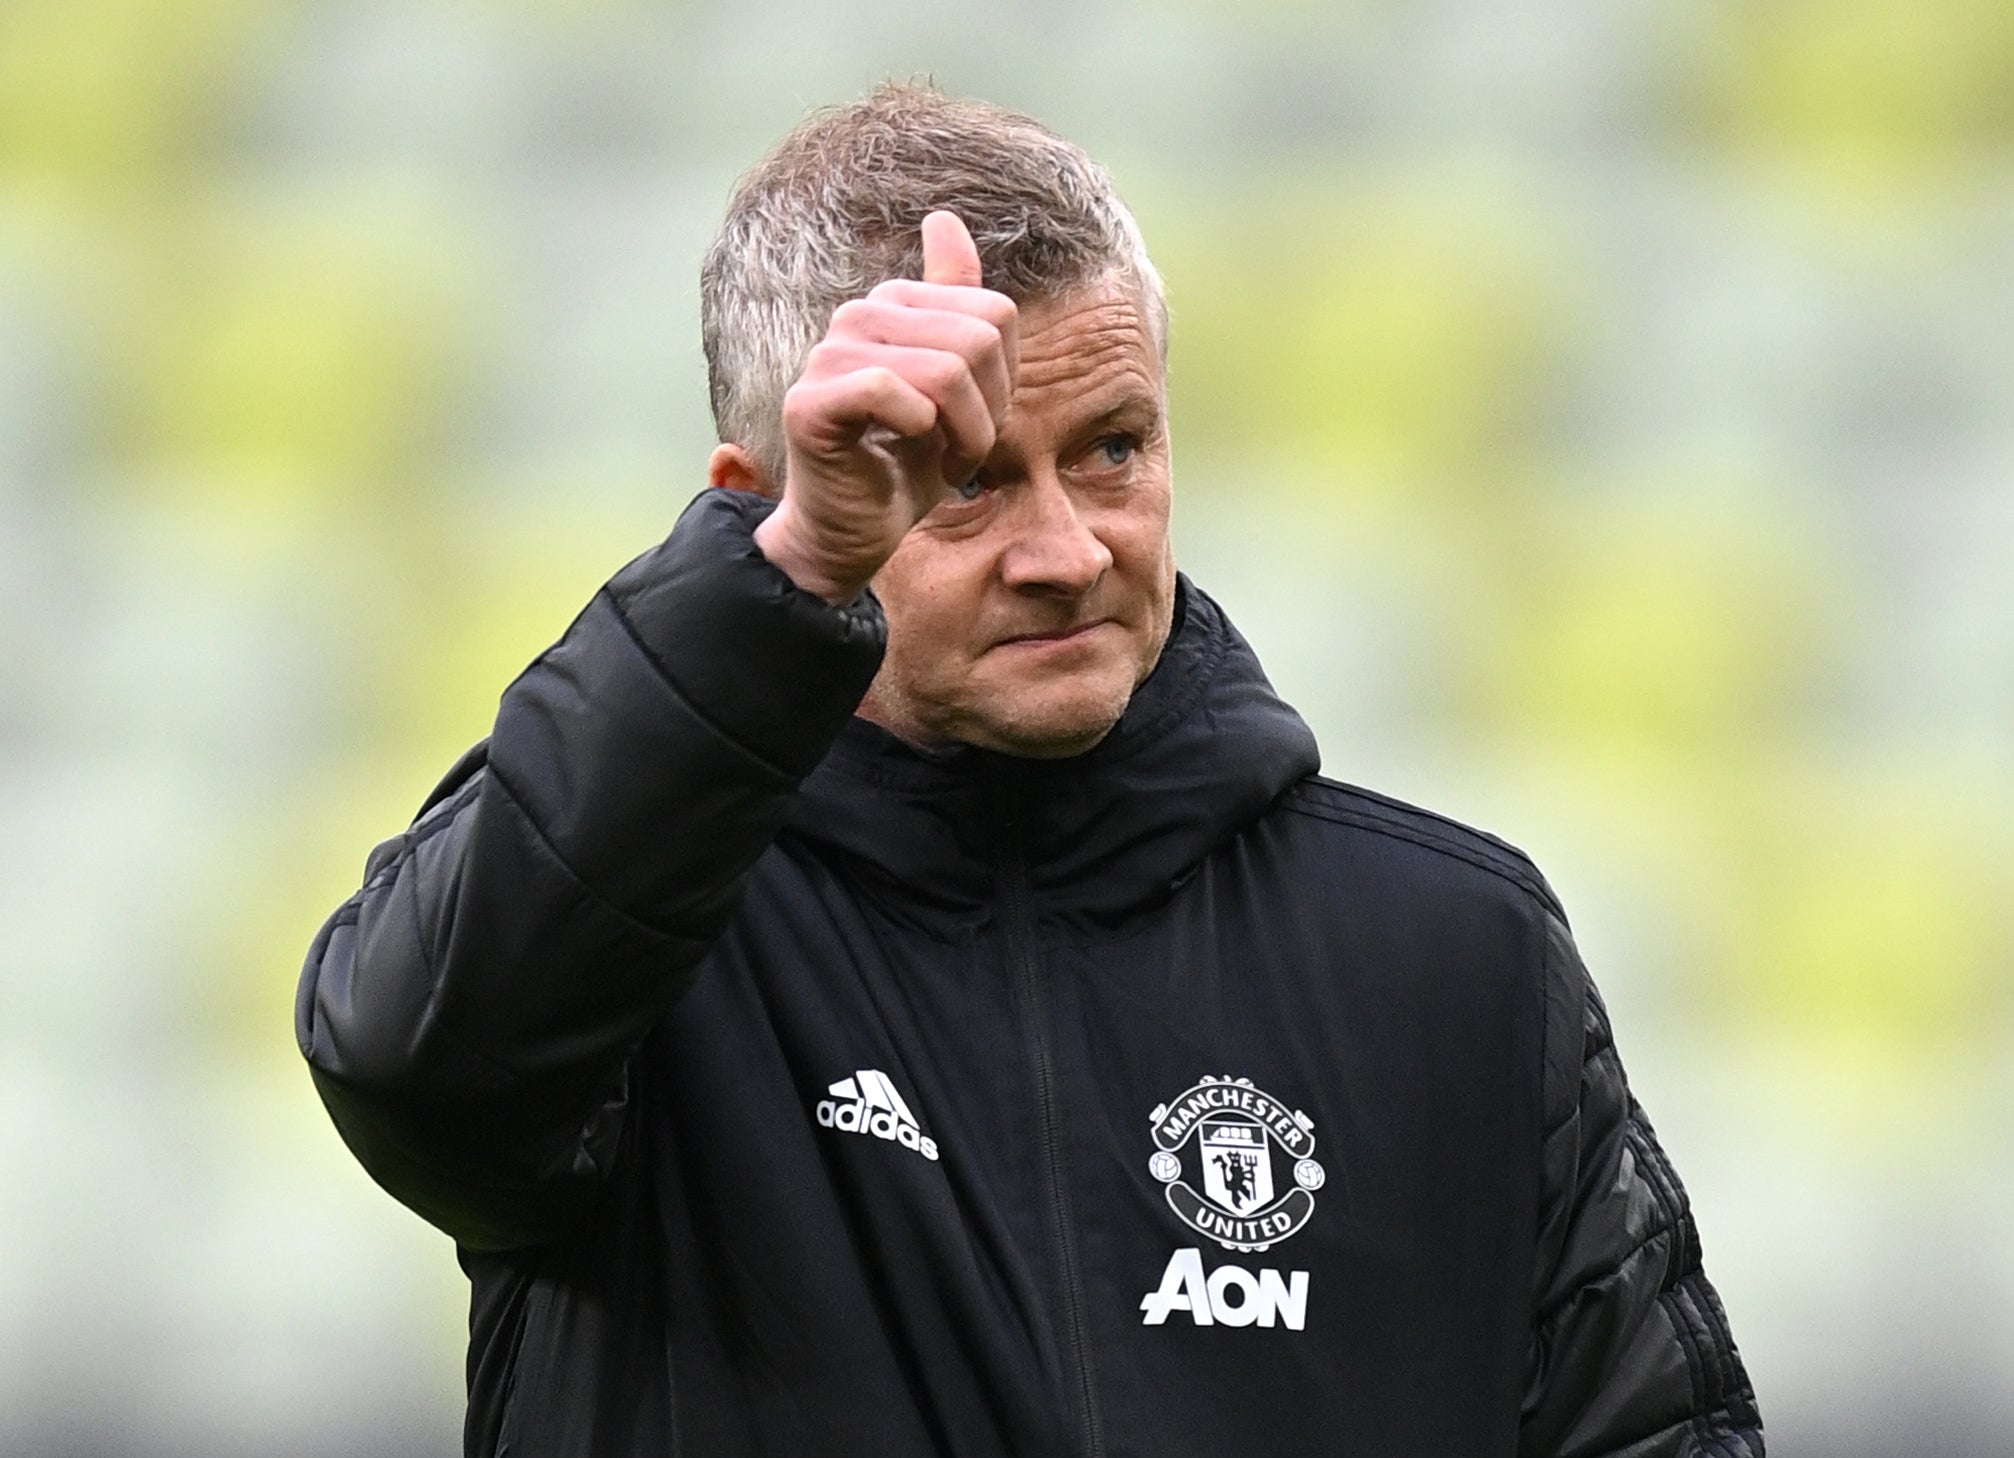 Ole Gunnar Solskjaer remains in charge of the Red Devils as they look to end their search for another Premier League title (Rafal Oleksiewicz/PA)